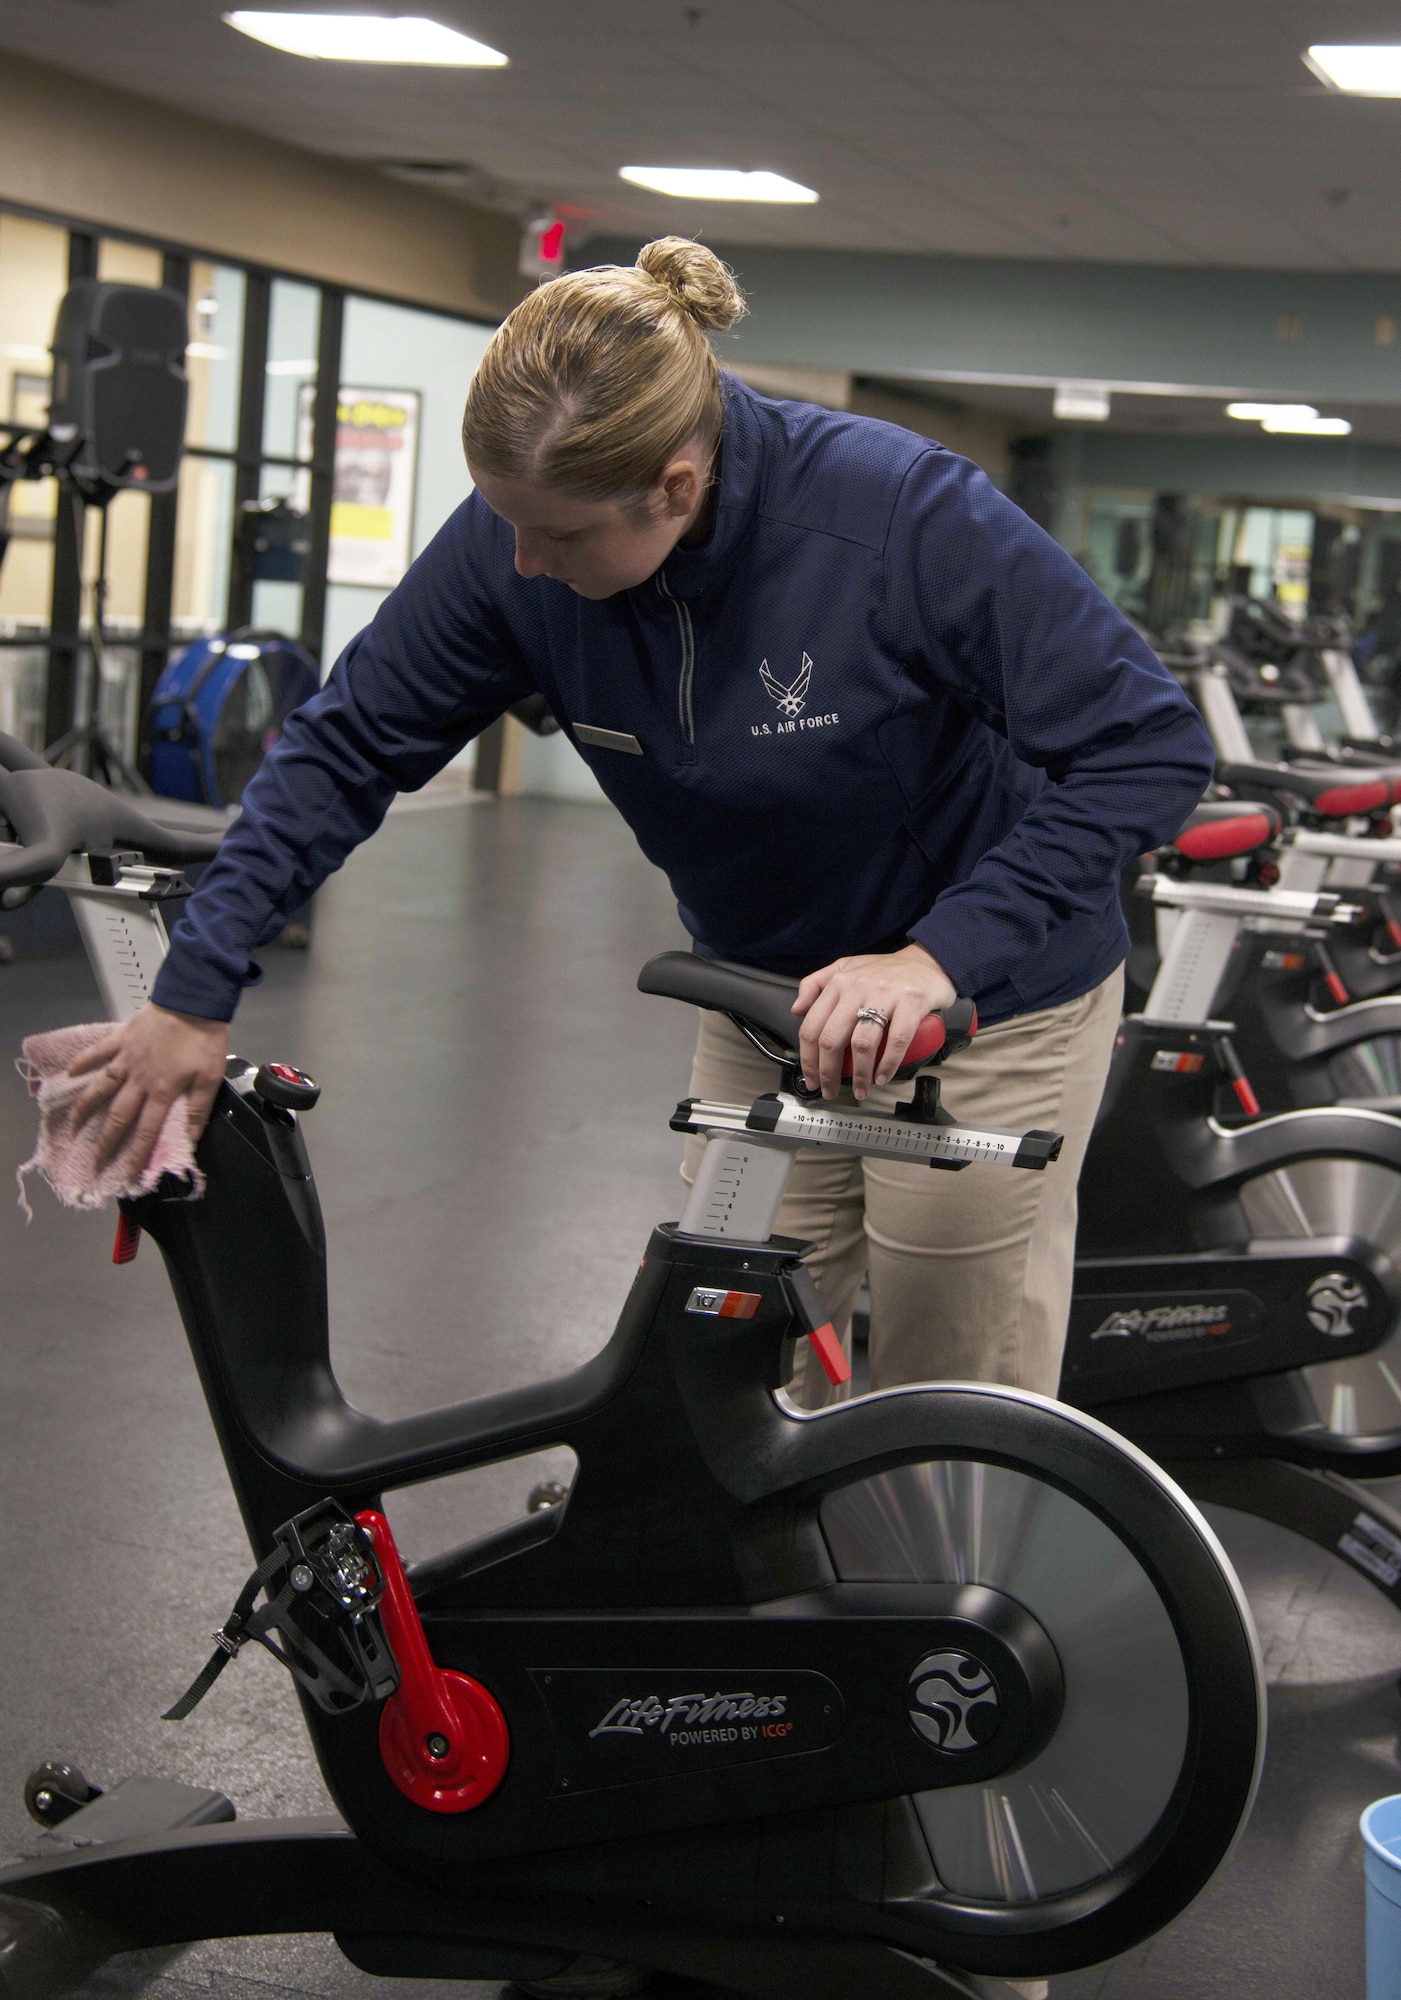 U.S. Air Force Senior Airman Sage Iverson, a fitness specialist assigned to the 6th Force Support Squadron, wipes down a spin machine at MacDill Air Force Base, Fla., Nov. 8, 2017.